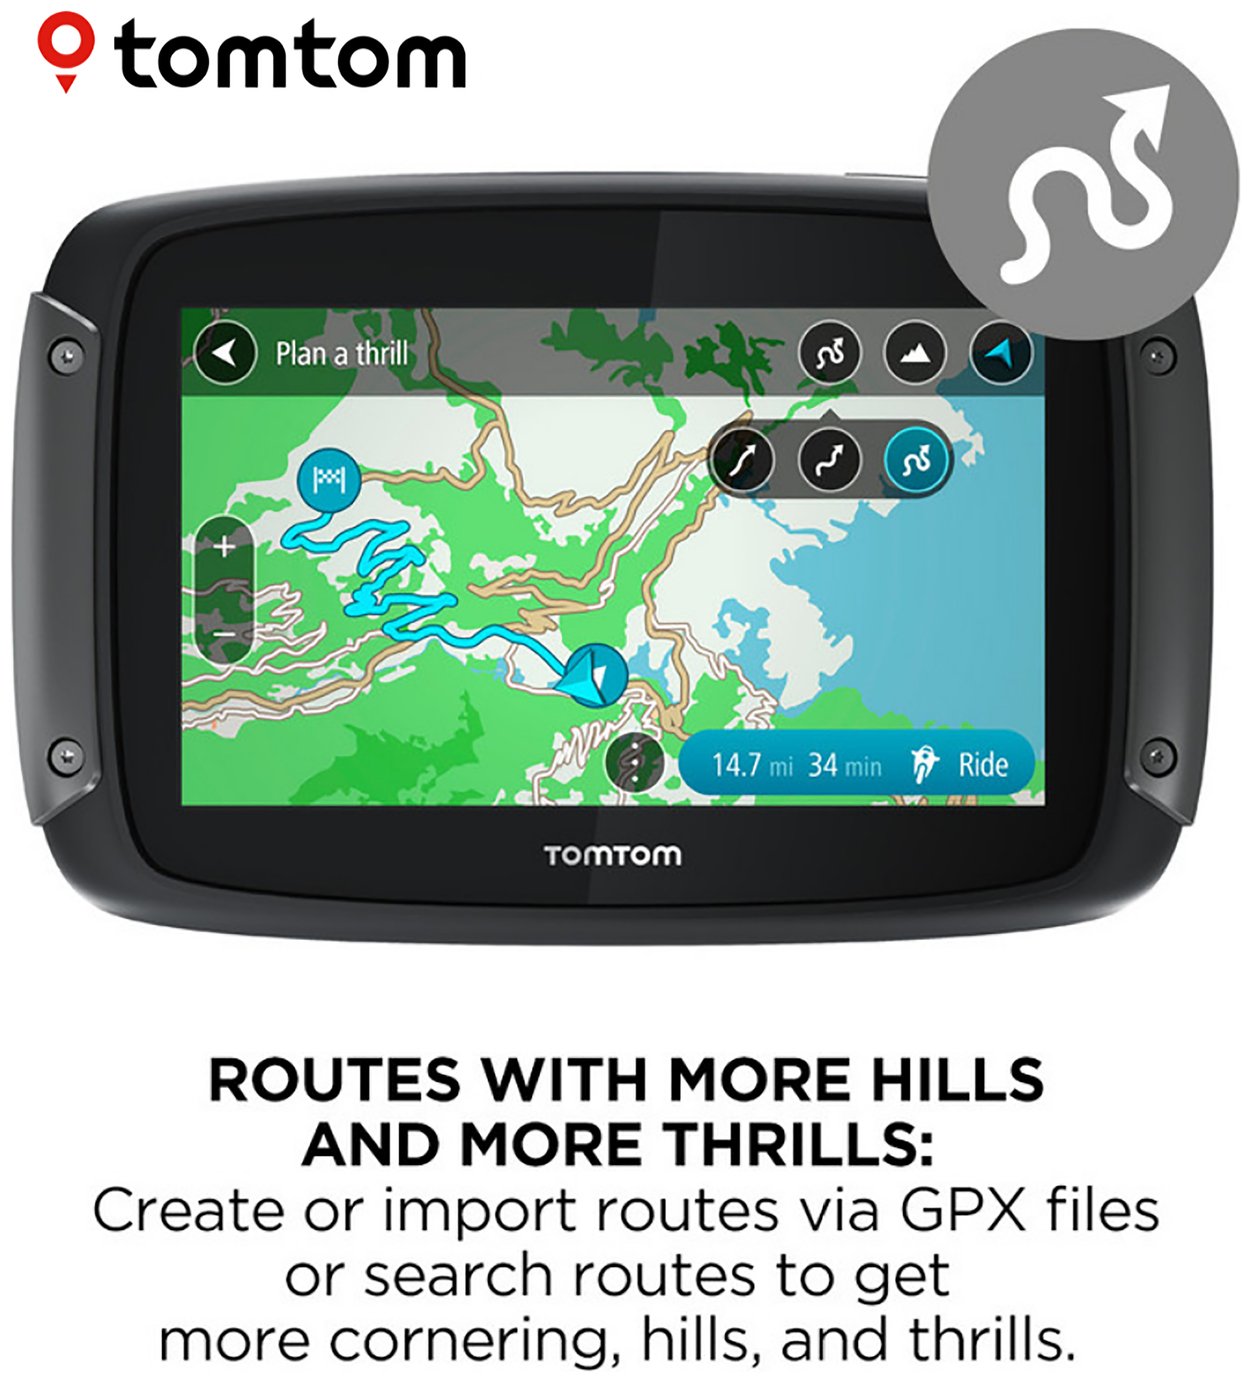 TomTom Rider 500 Motorcycle 4.3 In Sat Nav With Europe Maps Review